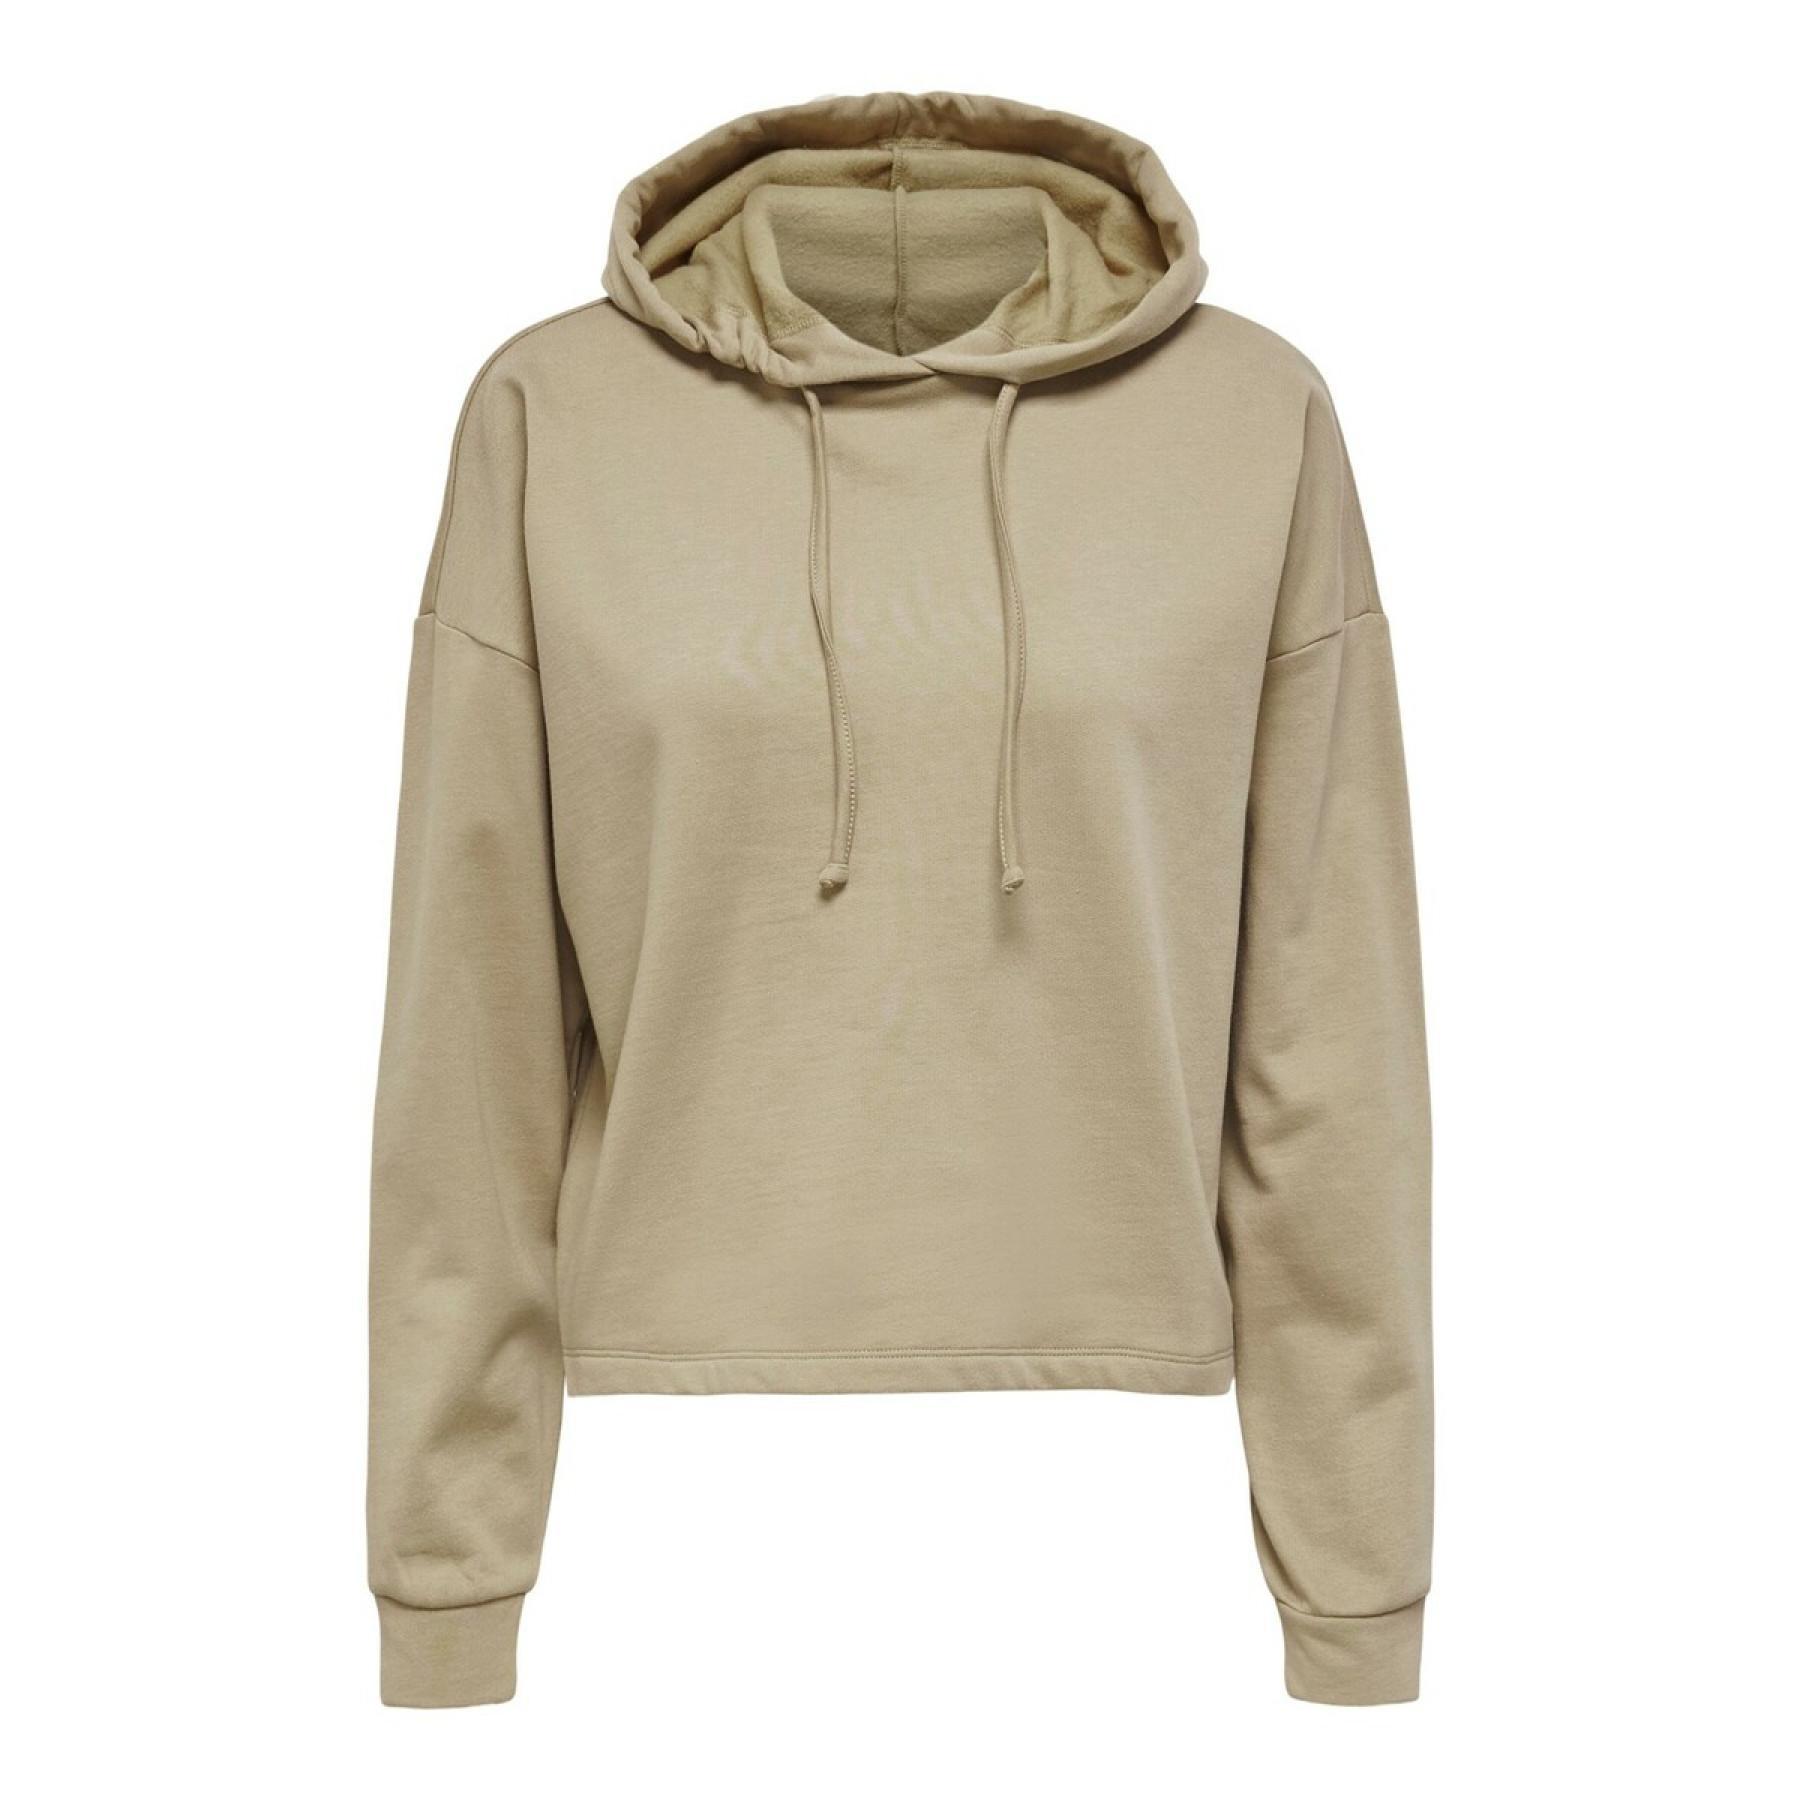 Women's hoodie Only Dreamer life